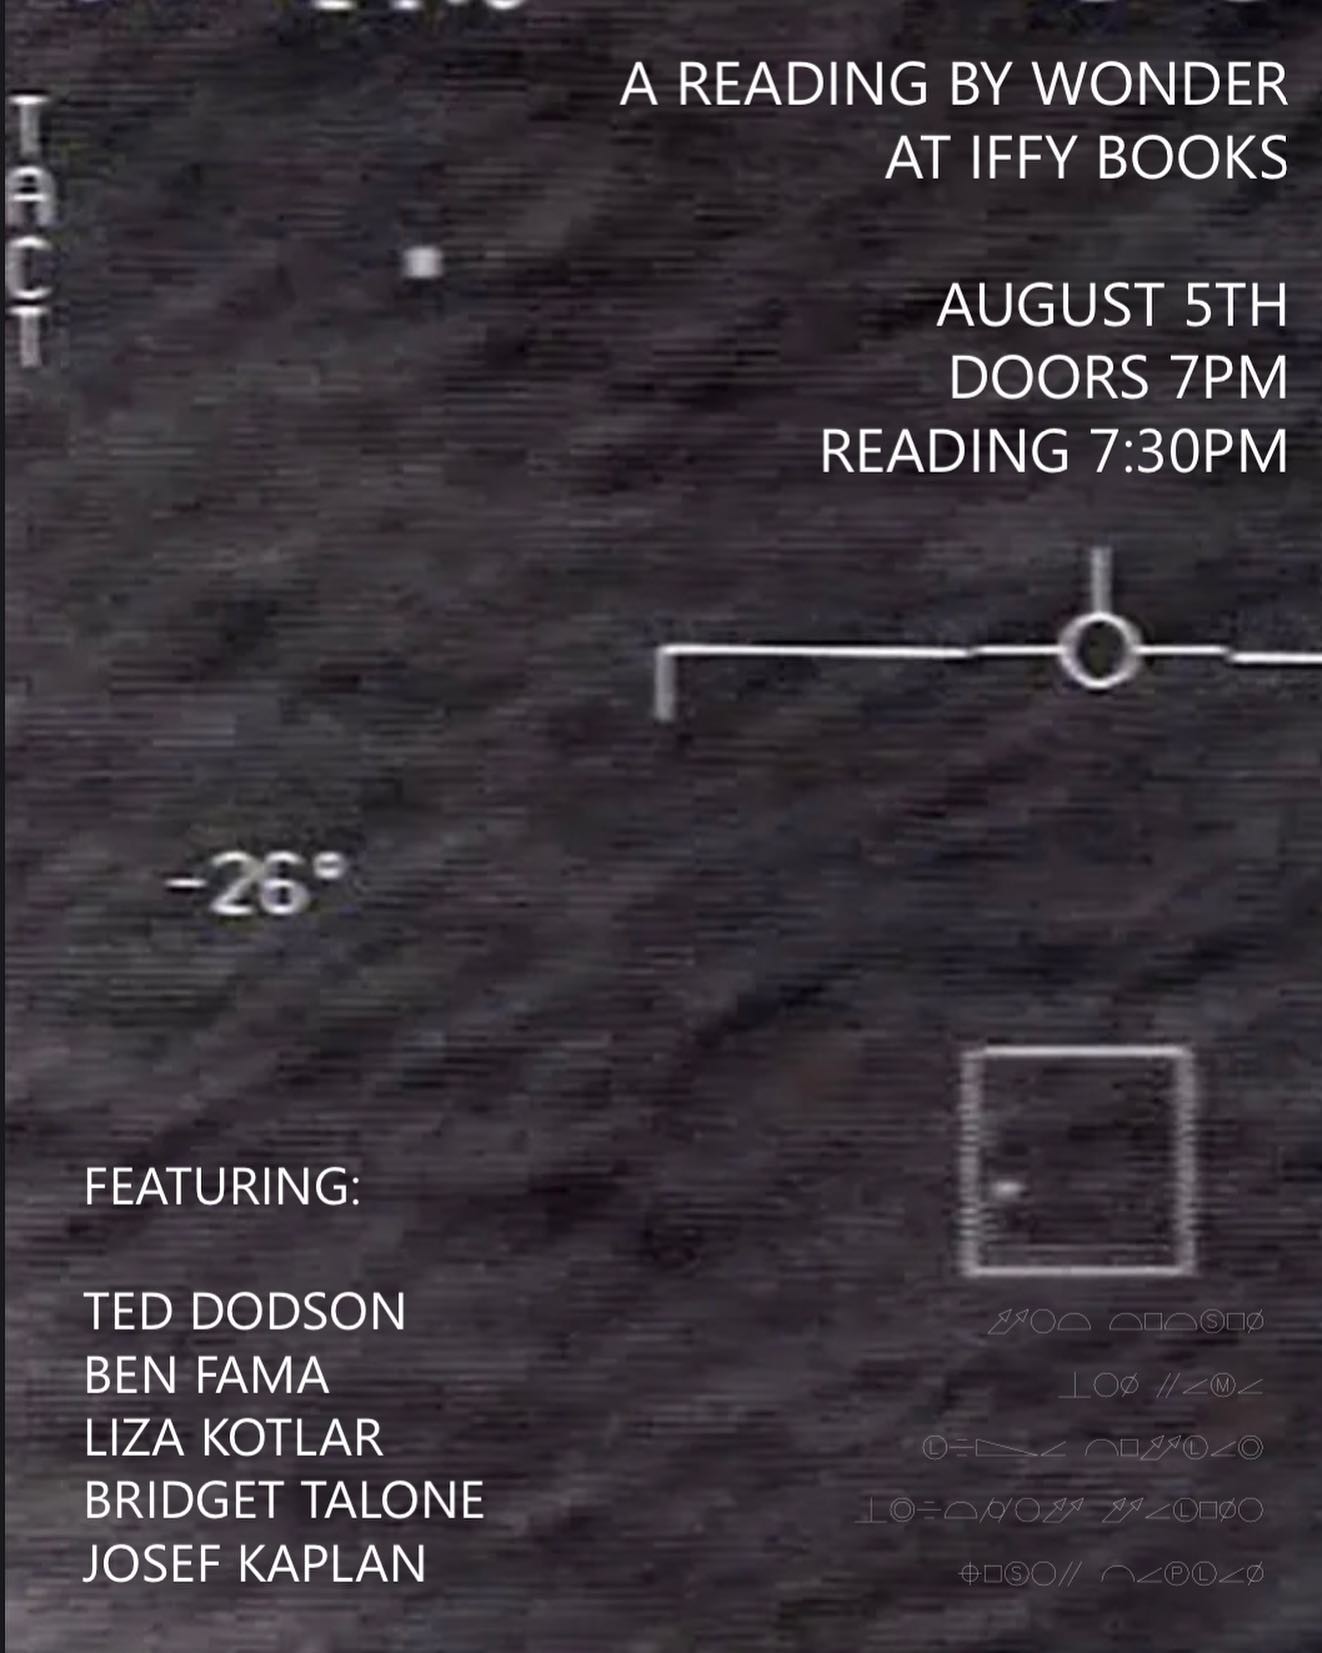 Flyer with a blurry image of a UFO(?) from a camera on an airplane flying at night. This text is superimposed: A READING BY WONDER AT IFFY BOOKS / AUGUST 5TH / DOORS 7PM / READING 7:30PM / FEATURING: TED DODSON / BEN FAMA / LIZA KOTLAR / BRIDGET TALONE / JOSEF KAPLAN